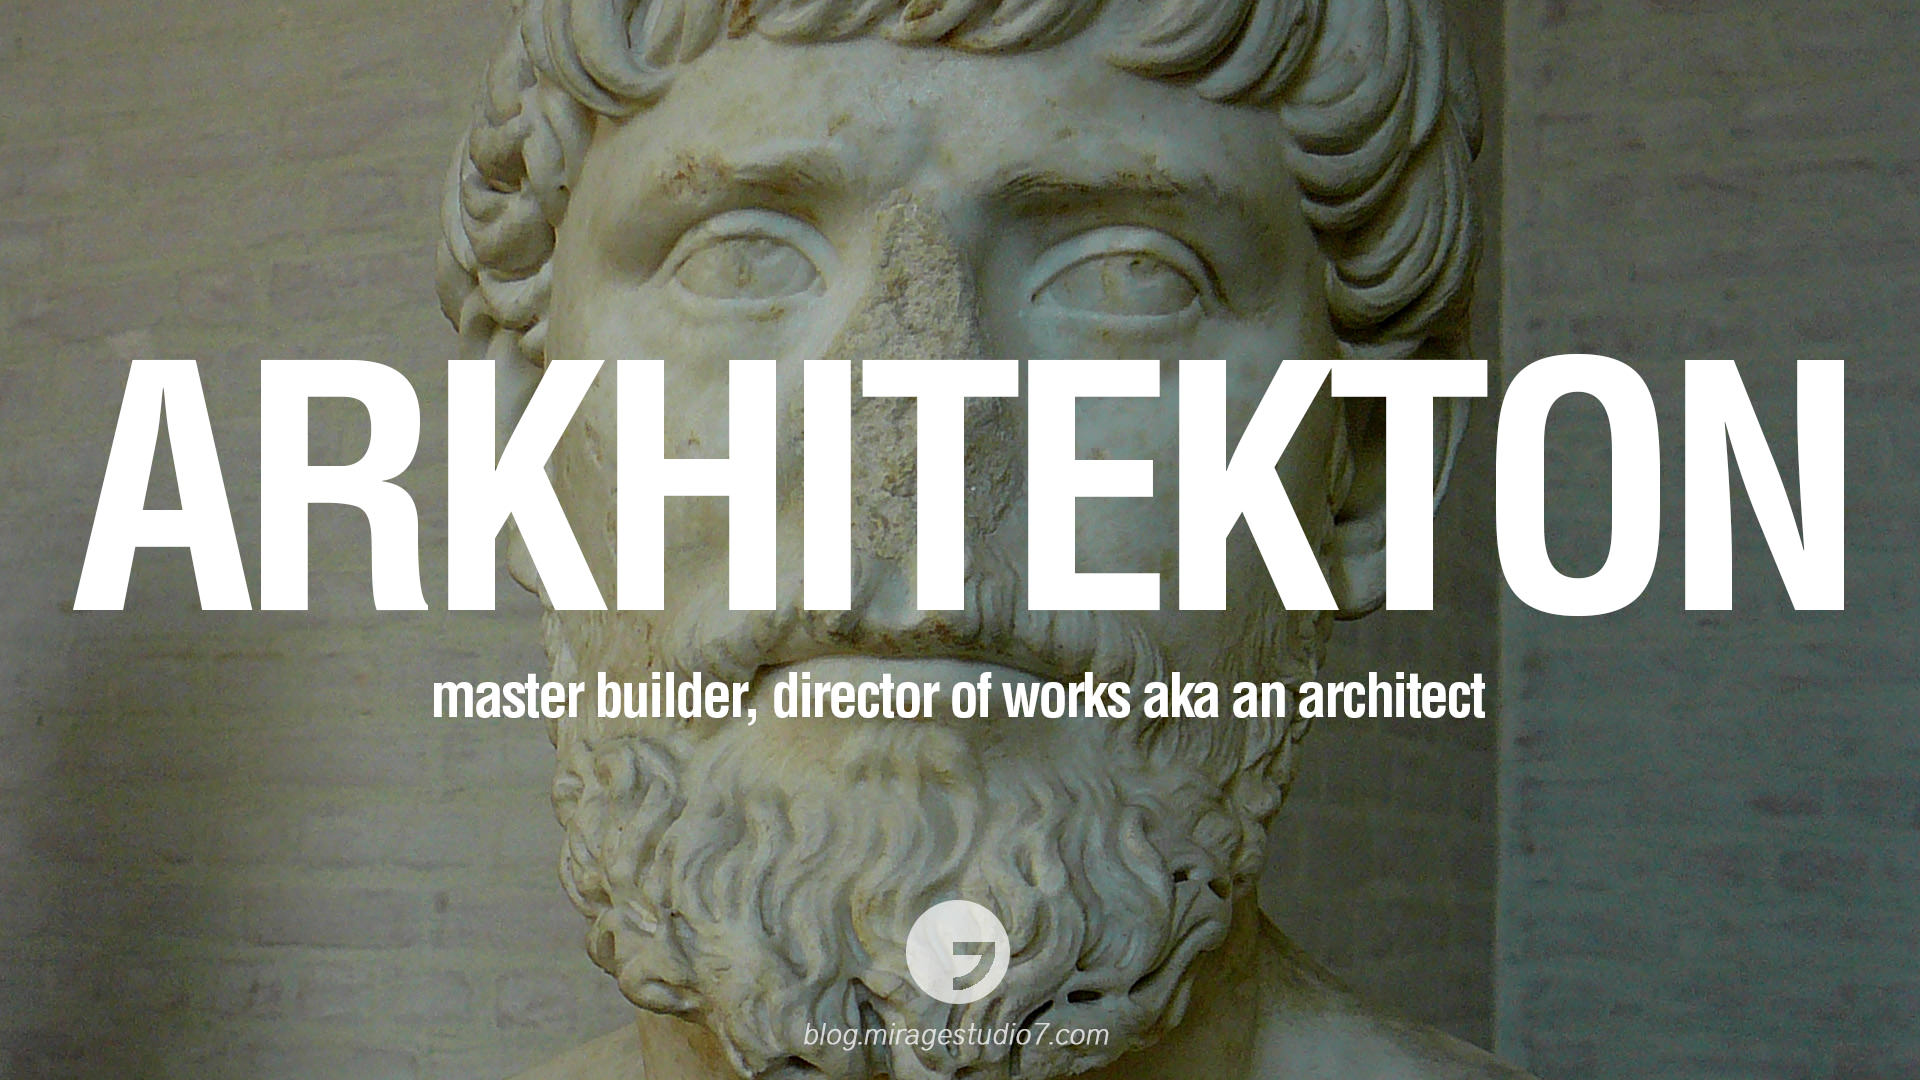 10 Beautiful Latin and Ancient Greek Architectural Words